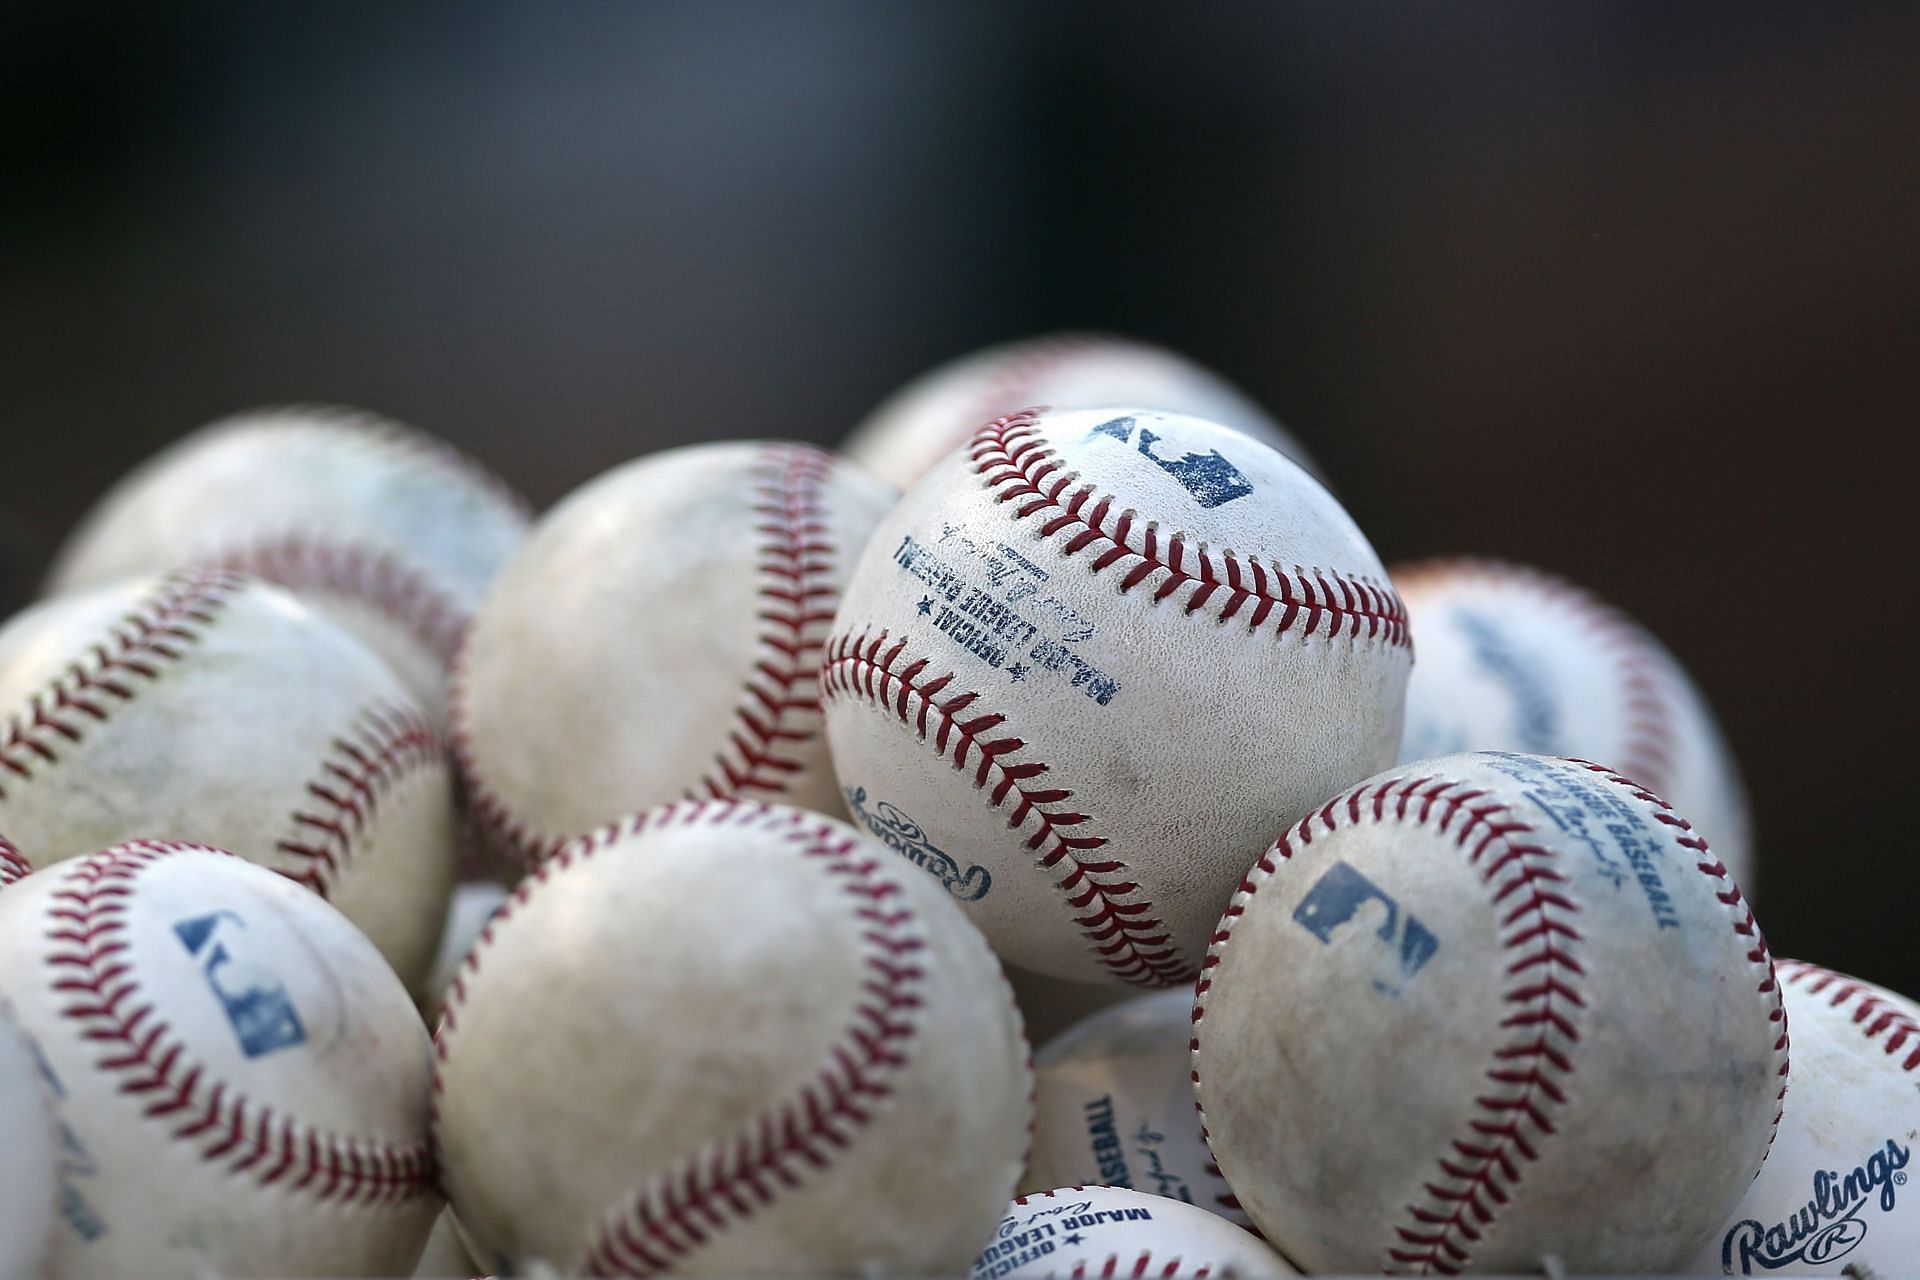 San Francisco Giants vs Colorado Rockies: MLB baseballs consist of a cork and rubber core, have a circumference of 9 inches, and weigh over 5 ounces.